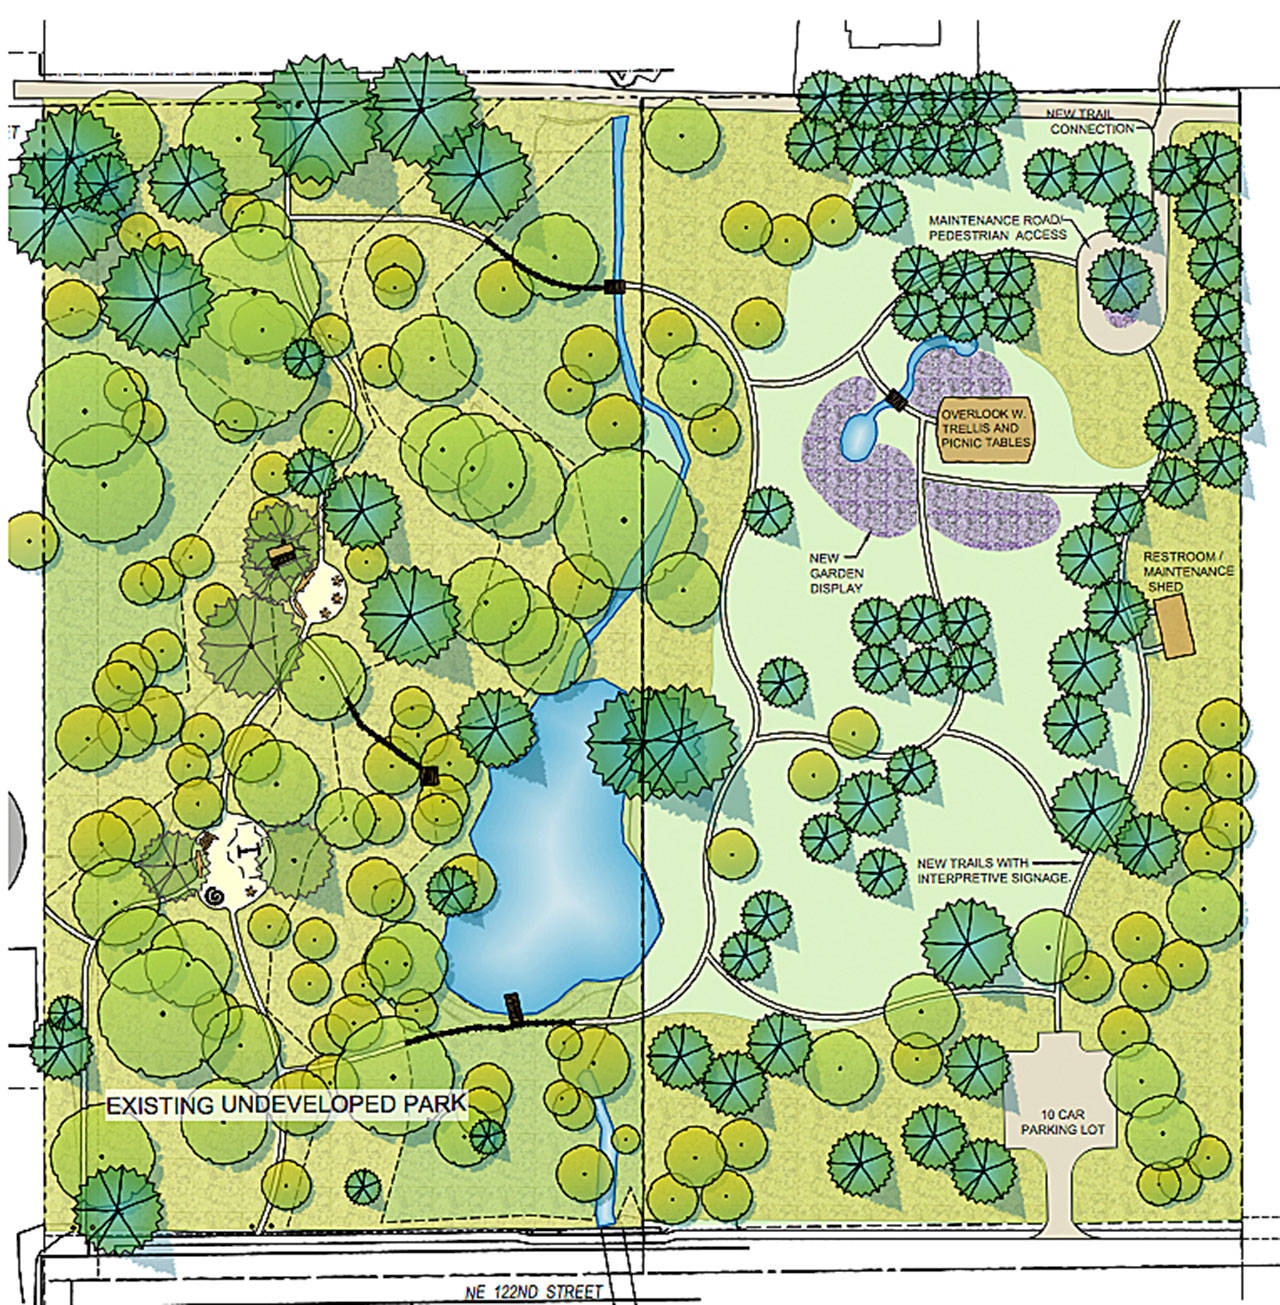 Image courtesy of the city of Redmond                                 Smith Woods, Conceptual Plan.